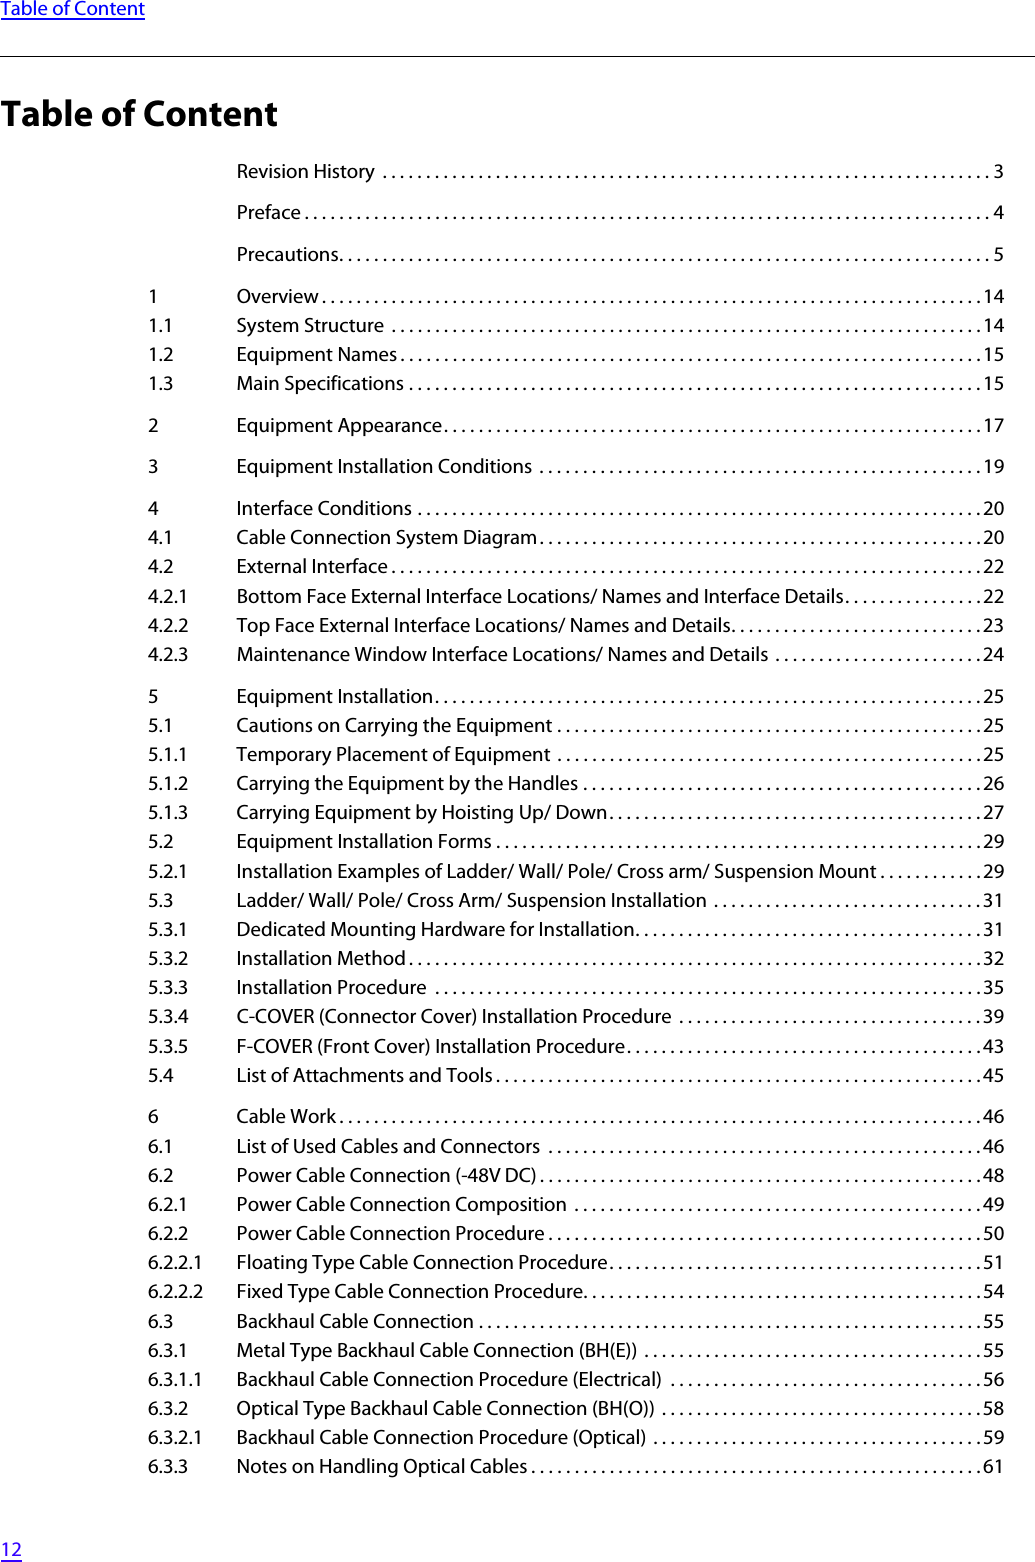   12Table of ContentTable of ContentRevision History  . . . . . . . . . . . . . . . . . . . . . . . . . . . . . . . . . . . . . . . . . . . . . . . . . . . . . . . . . . . . . . . . . . . . . . 3Preface . . . . . . . . . . . . . . . . . . . . . . . . . . . . . . . . . . . . . . . . . . . . . . . . . . . . . . . . . . . . . . . . . . . . . . . . . . . . . . . 4Precautions. . . . . . . . . . . . . . . . . . . . . . . . . . . . . . . . . . . . . . . . . . . . . . . . . . . . . . . . . . . . . . . . . . . . . . . . . . . 51 Overview . . . . . . . . . . . . . . . . . . . . . . . . . . . . . . . . . . . . . . . . . . . . . . . . . . . . . . . . . . . . . . . . . . . . . . . . . . . .141.1 System Structure  . . . . . . . . . . . . . . . . . . . . . . . . . . . . . . . . . . . . . . . . . . . . . . . . . . . . . . . . . . . . . . . . . . . .141.2 Equipment Names . . . . . . . . . . . . . . . . . . . . . . . . . . . . . . . . . . . . . . . . . . . . . . . . . . . . . . . . . . . . . . . . . . . 151.3 Main Specifications . . . . . . . . . . . . . . . . . . . . . . . . . . . . . . . . . . . . . . . . . . . . . . . . . . . . . . . . . . . . . . . . . .152 Equipment Appearance. . . . . . . . . . . . . . . . . . . . . . . . . . . . . . . . . . . . . . . . . . . . . . . . . . . . . . . . . . . . . .173 Equipment Installation Conditions  . . . . . . . . . . . . . . . . . . . . . . . . . . . . . . . . . . . . . . . . . . . . . . . . . . . 194 Interface Conditions . . . . . . . . . . . . . . . . . . . . . . . . . . . . . . . . . . . . . . . . . . . . . . . . . . . . . . . . . . . . . . . . .204.1 Cable Connection System Diagram. . . . . . . . . . . . . . . . . . . . . . . . . . . . . . . . . . . . . . . . . . . . . . . . . . .204.2 External Interface . . . . . . . . . . . . . . . . . . . . . . . . . . . . . . . . . . . . . . . . . . . . . . . . . . . . . . . . . . . . . . . . . . . . 224.2.1 Bottom Face External Interface Locations/ Names and Interface Details. . . . . . . . . . . . . . . . 224.2.2 Top Face External Interface Locations/ Names and Details. . . . . . . . . . . . . . . . . . . . . . . . . . . . . 234.2.3 Maintenance Window Interface Locations/ Names and Details  . . . . . . . . . . . . . . . . . . . . . . . . 245 Equipment Installation. . . . . . . . . . . . . . . . . . . . . . . . . . . . . . . . . . . . . . . . . . . . . . . . . . . . . . . . . . . . . . . 255.1 Cautions on Carrying the Equipment . . . . . . . . . . . . . . . . . . . . . . . . . . . . . . . . . . . . . . . . . . . . . . . . .255.1.1 Temporary Placement of Equipment . . . . . . . . . . . . . . . . . . . . . . . . . . . . . . . . . . . . . . . . . . . . . . . . . 255.1.2 Carrying the Equipment by the Handles . . . . . . . . . . . . . . . . . . . . . . . . . . . . . . . . . . . . . . . . . . . . . . 265.1.3 Carrying Equipment by Hoisting Up/ Down. . . . . . . . . . . . . . . . . . . . . . . . . . . . . . . . . . . . . . . . . . .275.2 Equipment Installation Forms . . . . . . . . . . . . . . . . . . . . . . . . . . . . . . . . . . . . . . . . . . . . . . . . . . . . . . . .295.2.1 Installation Examples of Ladder/ Wall/ Pole/ Cross arm/ Suspension Mount . . . . . . . . . . . . 295.3 Ladder/ Wall/ Pole/ Cross Arm/ Suspension Installation  . . . . . . . . . . . . . . . . . . . . . . . . . . . . . . . 315.3.1 Dedicated Mounting Hardware for Installation. . . . . . . . . . . . . . . . . . . . . . . . . . . . . . . . . . . . . . . .315.3.2 Installation Method . . . . . . . . . . . . . . . . . . . . . . . . . . . . . . . . . . . . . . . . . . . . . . . . . . . . . . . . . . . . . . . . . .325.3.3 Installation Procedure  . . . . . . . . . . . . . . . . . . . . . . . . . . . . . . . . . . . . . . . . . . . . . . . . . . . . . . . . . . . . . . .355.3.4 C-COVER (Connector Cover) Installation Procedure  . . . . . . . . . . . . . . . . . . . . . . . . . . . . . . . . . . . 395.3.5 F-COVER (Front Cover) Installation Procedure. . . . . . . . . . . . . . . . . . . . . . . . . . . . . . . . . . . . . . . . . 435.4 List of Attachments and Tools . . . . . . . . . . . . . . . . . . . . . . . . . . . . . . . . . . . . . . . . . . . . . . . . . . . . . . . . 456 Cable Work . . . . . . . . . . . . . . . . . . . . . . . . . . . . . . . . . . . . . . . . . . . . . . . . . . . . . . . . . . . . . . . . . . . . . . . . . .466.1 List of Used Cables and Connectors  . . . . . . . . . . . . . . . . . . . . . . . . . . . . . . . . . . . . . . . . . . . . . . . . . . 466.2 Power Cable Connection (-48V DC) . . . . . . . . . . . . . . . . . . . . . . . . . . . . . . . . . . . . . . . . . . . . . . . . . . . 486.2.1 Power Cable Connection Composition  . . . . . . . . . . . . . . . . . . . . . . . . . . . . . . . . . . . . . . . . . . . . . . . 496.2.2 Power Cable Connection Procedure . . . . . . . . . . . . . . . . . . . . . . . . . . . . . . . . . . . . . . . . . . . . . . . . . . 506.2.2.1 Floating Type Cable Connection Procedure. . . . . . . . . . . . . . . . . . . . . . . . . . . . . . . . . . . . . . . . . . . 516.2.2.2 Fixed Type Cable Connection Procedure. . . . . . . . . . . . . . . . . . . . . . . . . . . . . . . . . . . . . . . . . . . . . .546.3 Backhaul Cable Connection . . . . . . . . . . . . . . . . . . . . . . . . . . . . . . . . . . . . . . . . . . . . . . . . . . . . . . . . . .556.3.1 Metal Type Backhaul Cable Connection (BH(E))  . . . . . . . . . . . . . . . . . . . . . . . . . . . . . . . . . . . . . . . 556.3.1.1 Backhaul Cable Connection Procedure (Electrical)  . . . . . . . . . . . . . . . . . . . . . . . . . . . . . . . . . . . . 566.3.2 Optical Type Backhaul Cable Connection (BH(O))  . . . . . . . . . . . . . . . . . . . . . . . . . . . . . . . . . . . . . 586.3.2.1 Backhaul Cable Connection Procedure (Optical) . . . . . . . . . . . . . . . . . . . . . . . . . . . . . . . . . . . . . .596.3.3 Notes on Handling Optical Cables . . . . . . . . . . . . . . . . . . . . . . . . . . . . . . . . . . . . . . . . . . . . . . . . . . . .61